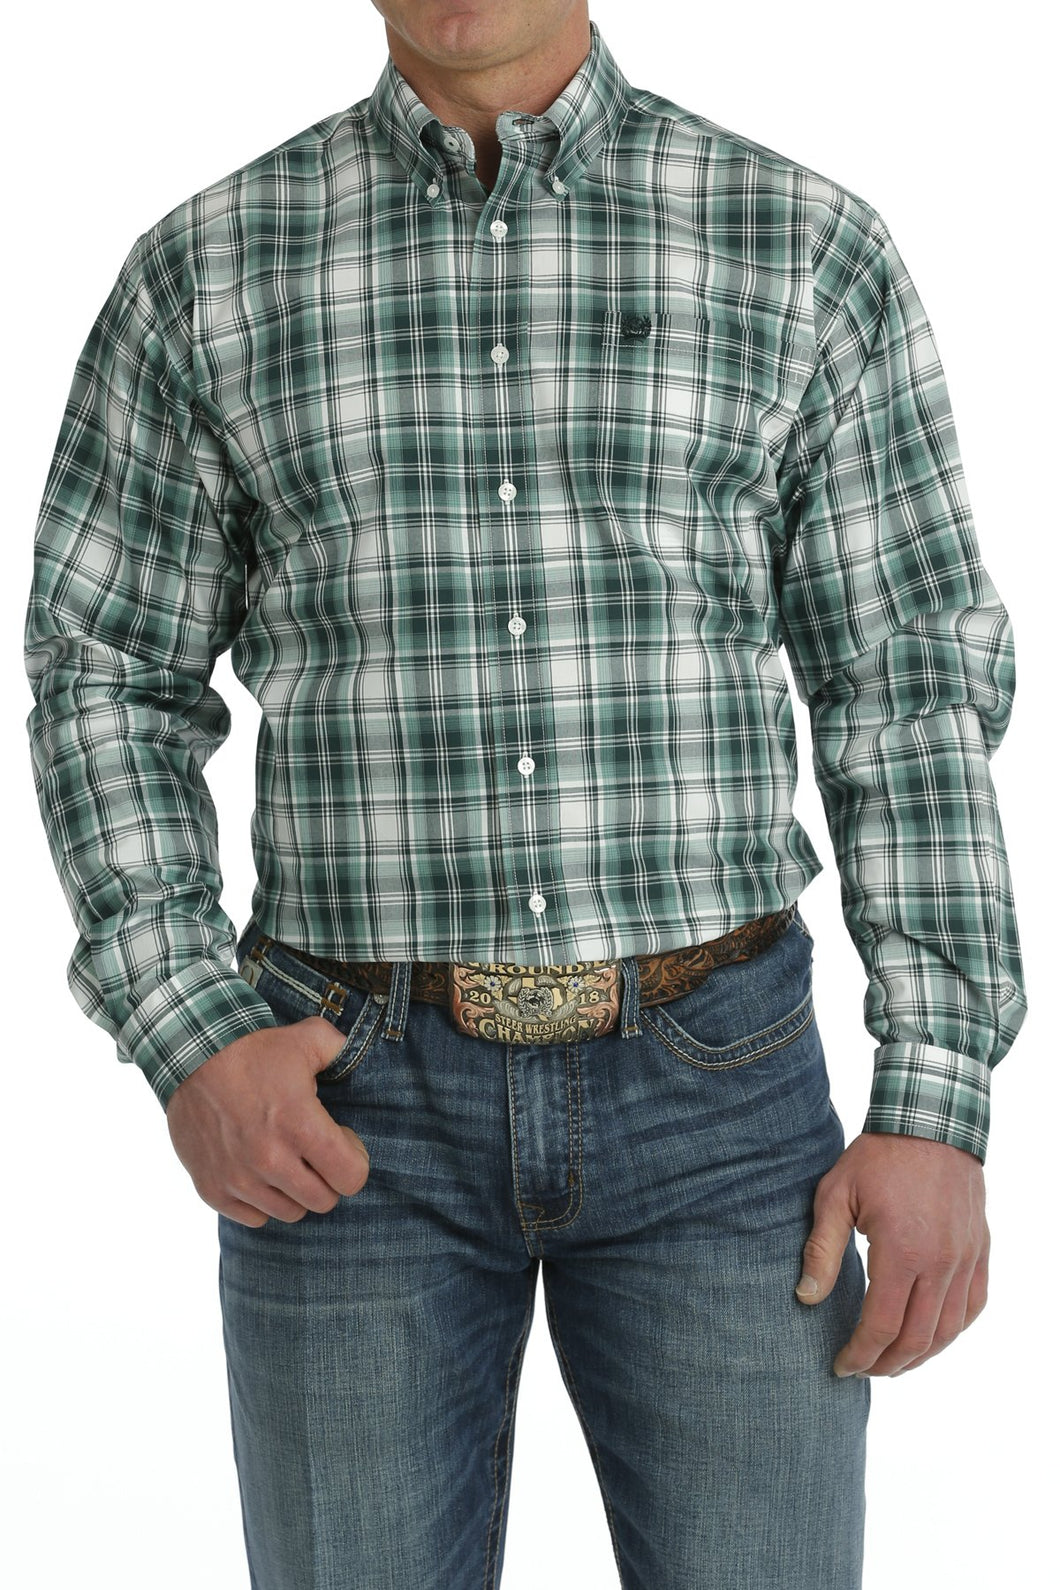 MEN'S PLAID BUTTON-DOWN LONG SLEEVE WESTERN SHIRT - TURQUOISE / WHITE